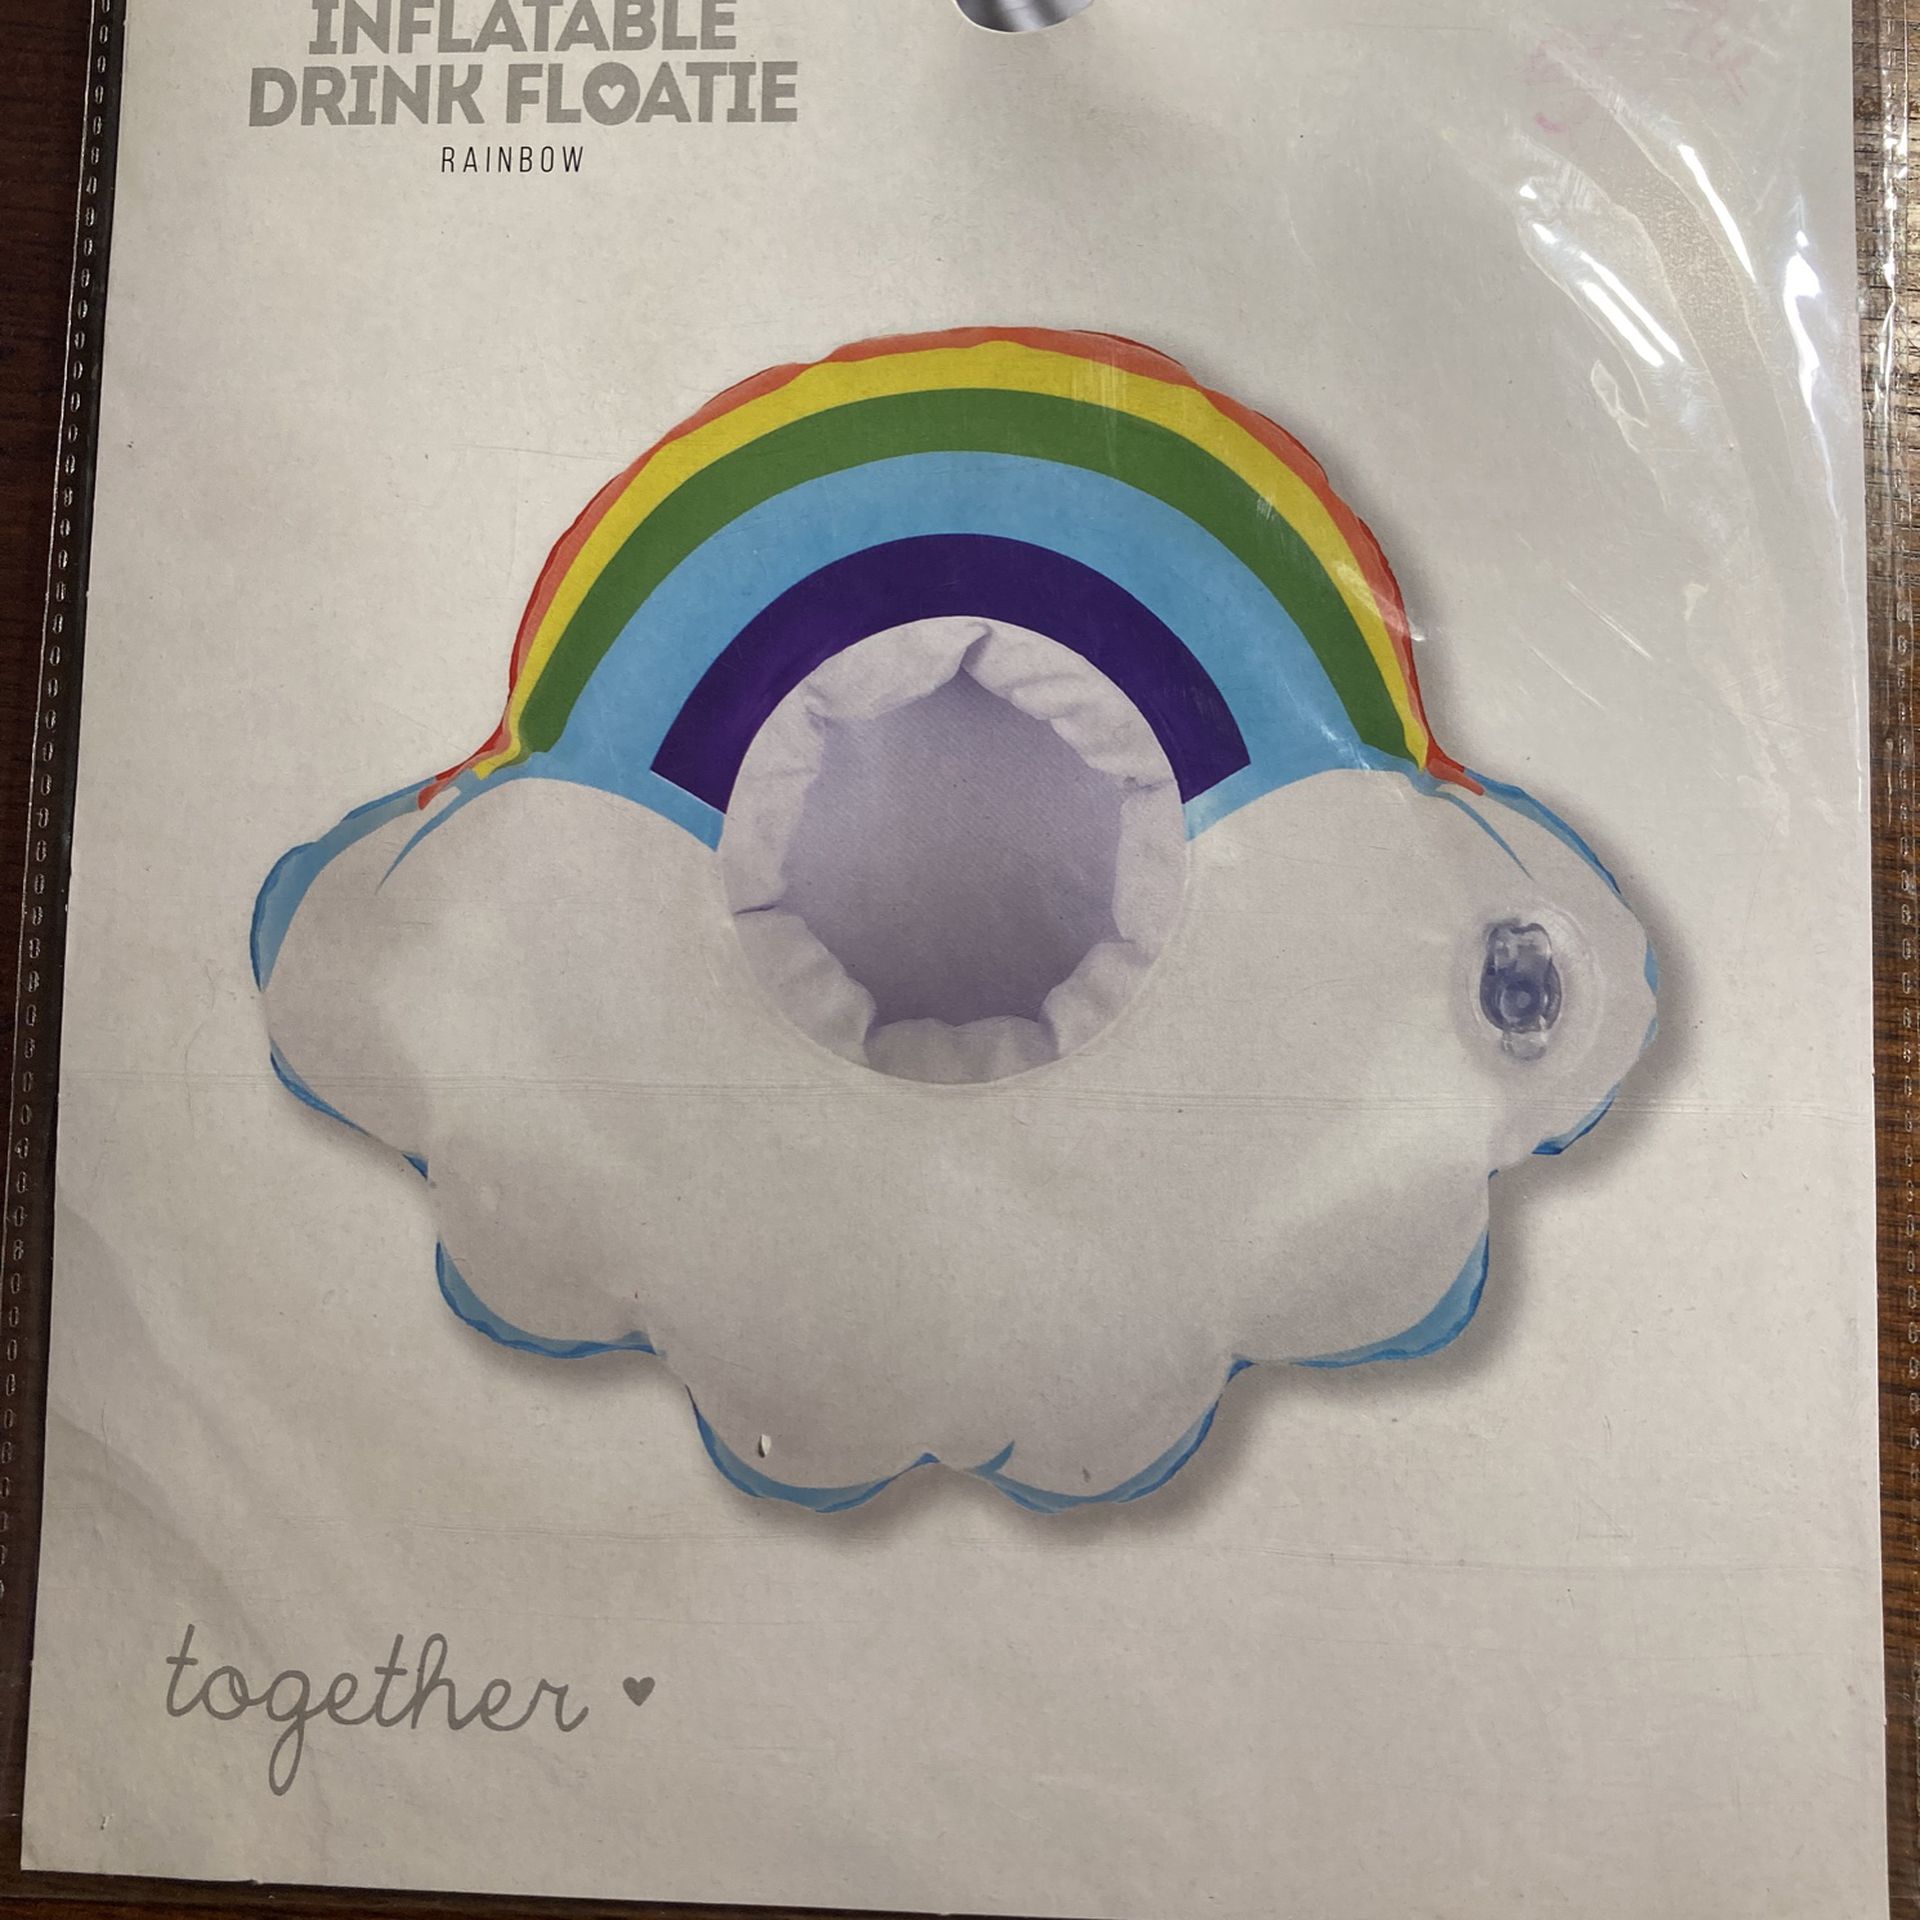 20 Rainbow 🌈 Cloud Drink Floats I Ship Same Day These Are New Unopened